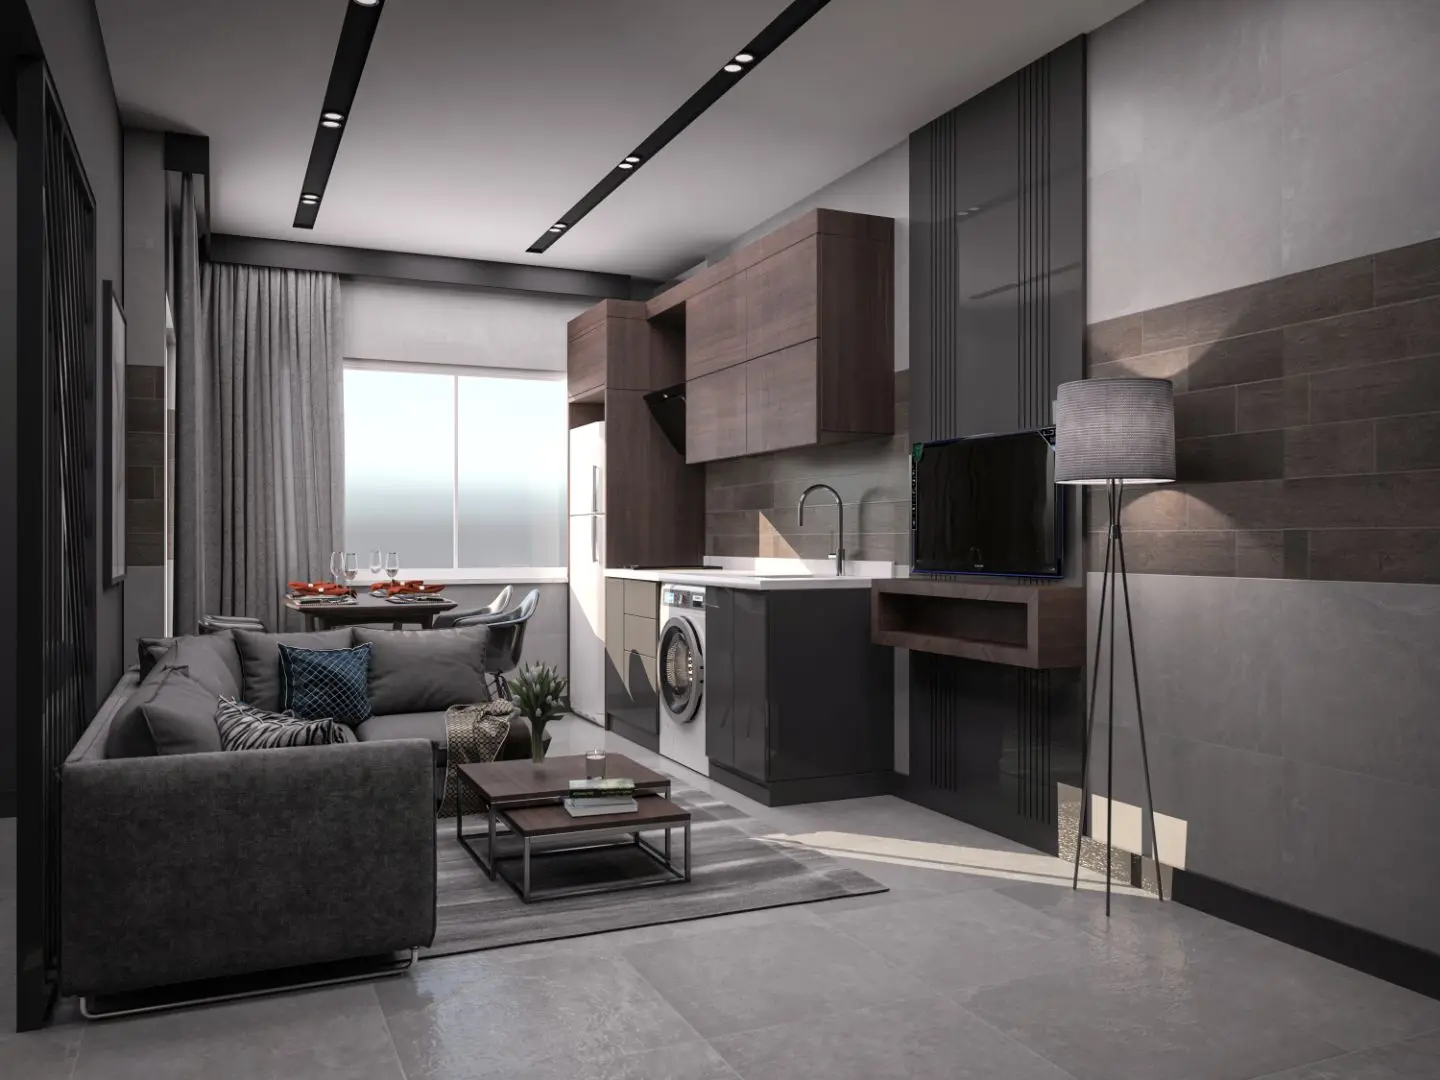 NEW RESIDENTIAL PROJECT IN THE CENTER OF ALANYA